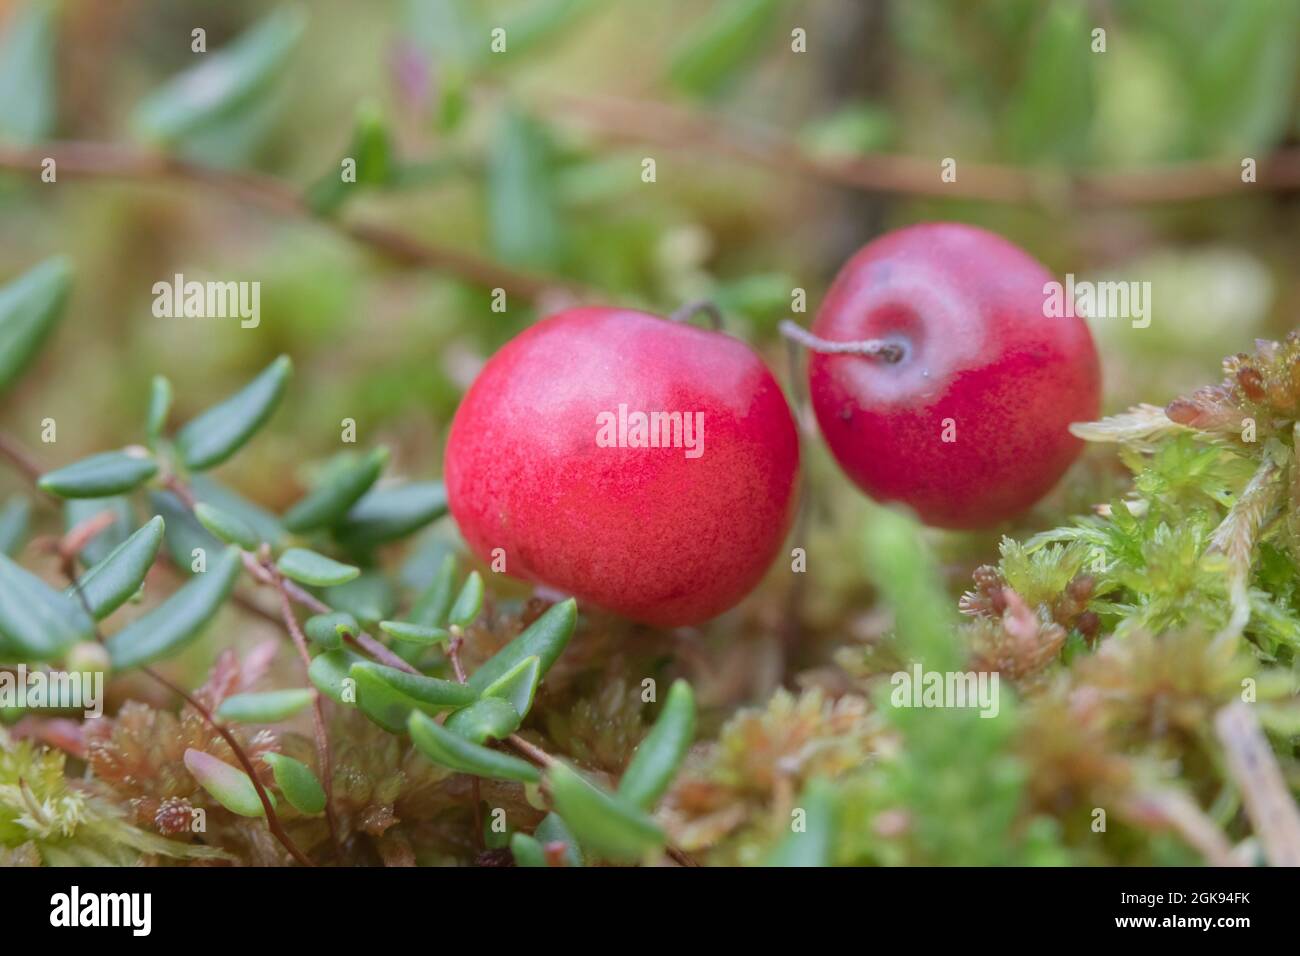 American cranberry, cultivated cranberry, large cranberry (Vaccinium macrocarpon), two berries on a twig, Germany, Bavaria Stock Photo